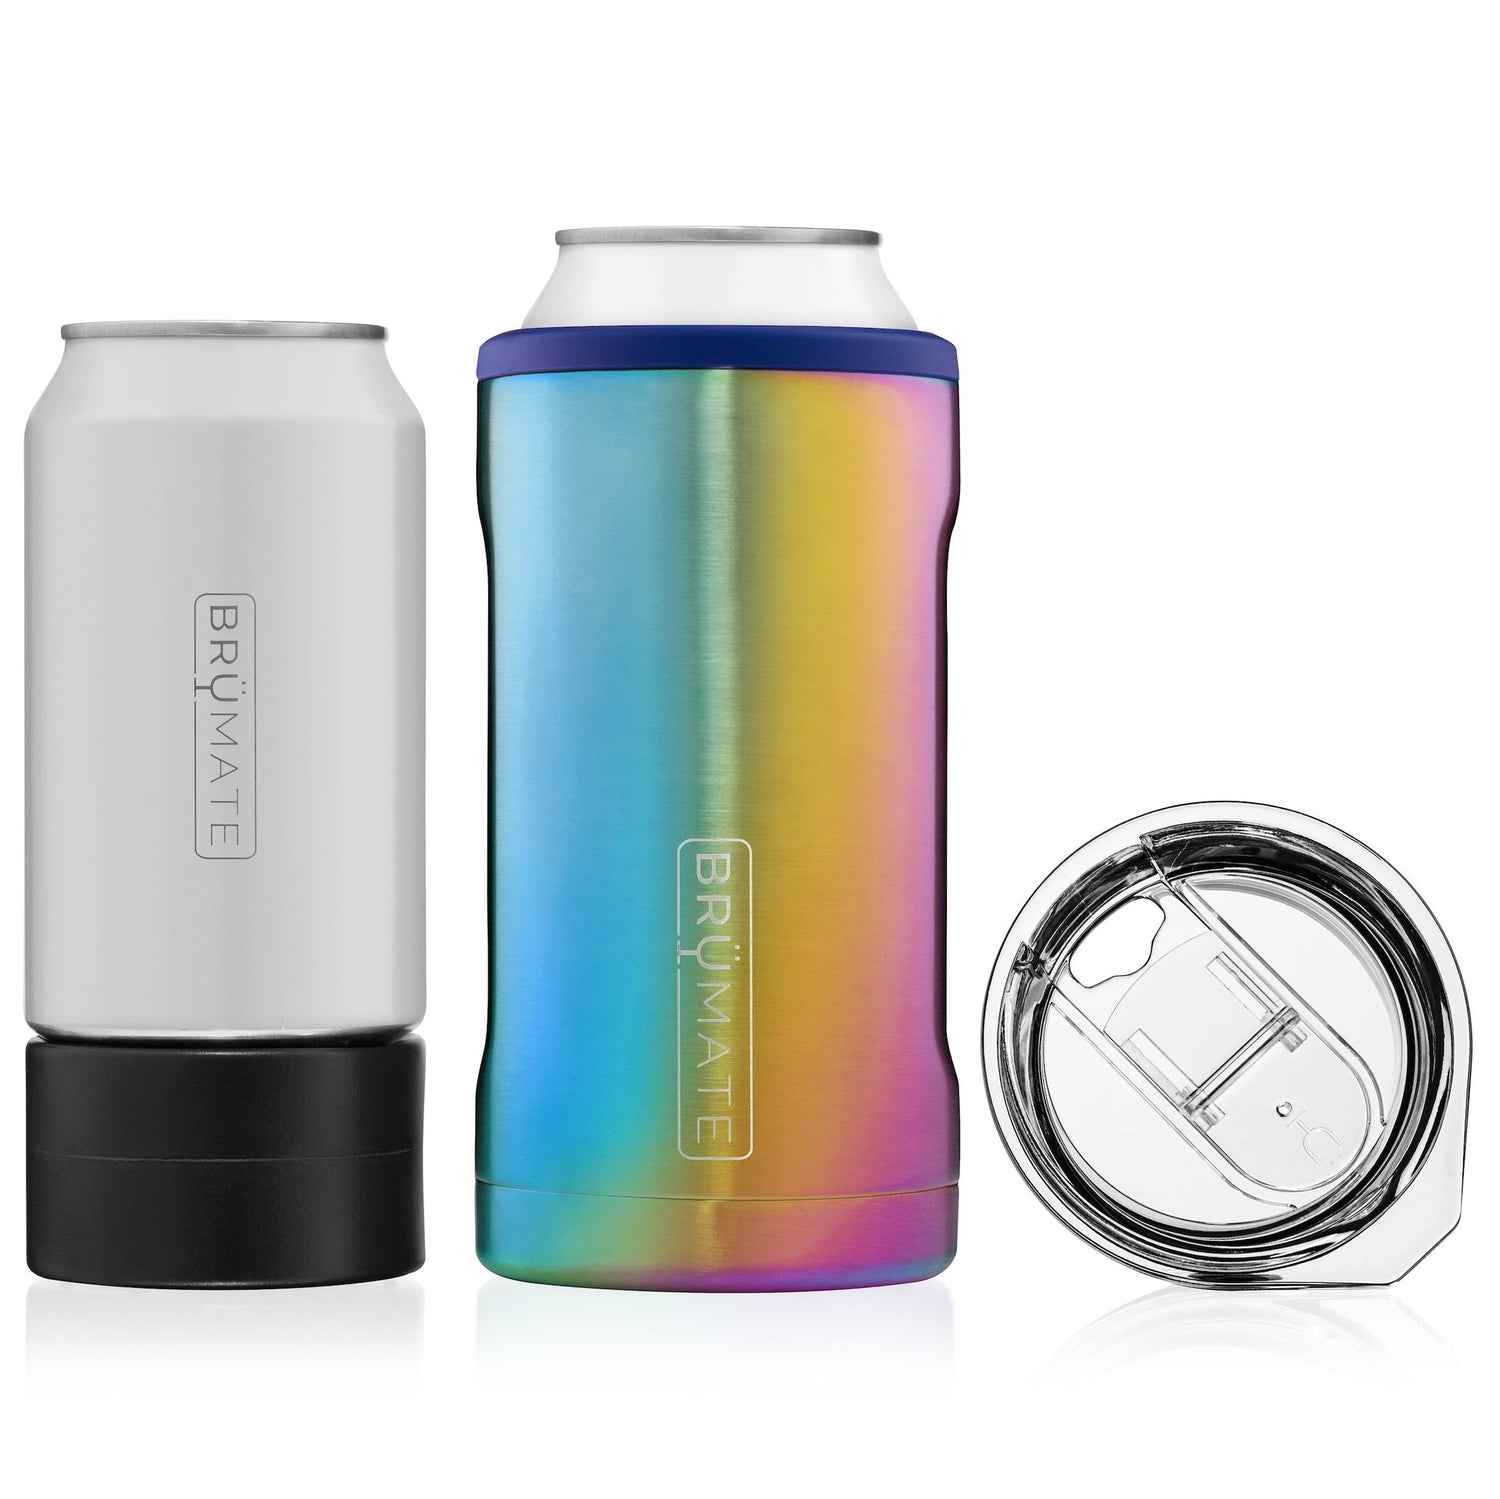 BruMate - Insulated Tumblers, Coolers, and More